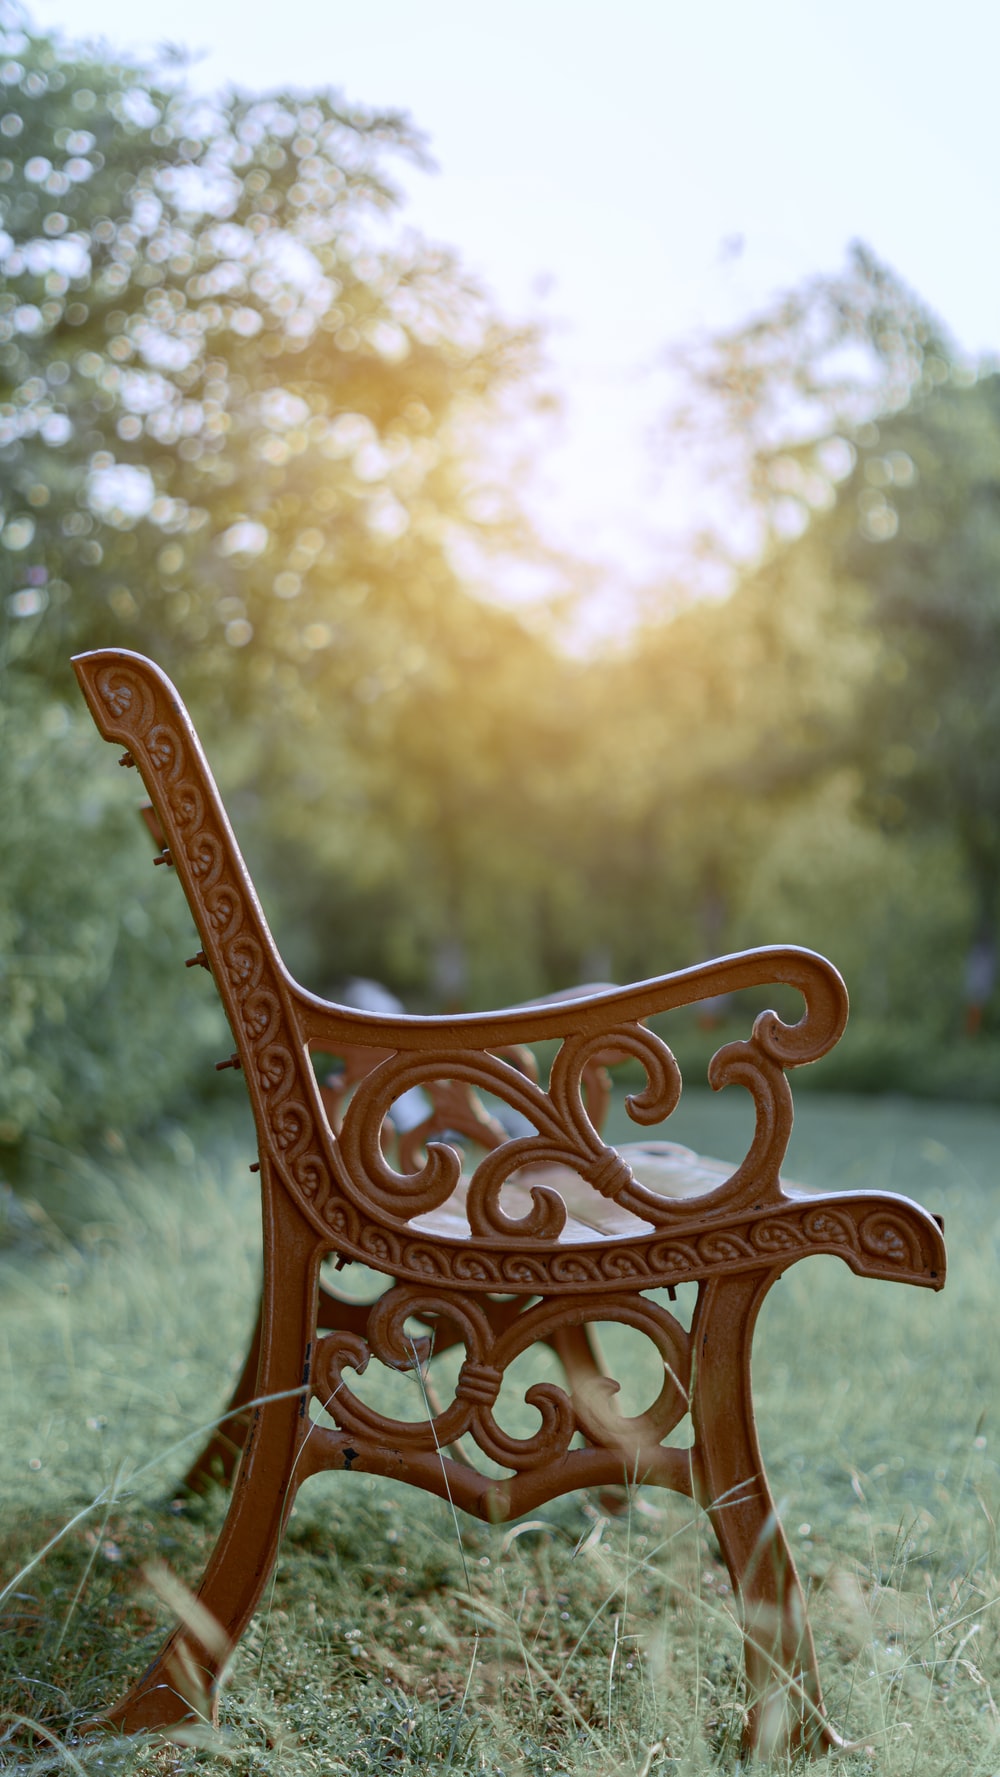 Garden Bench Picture. Download Free Image